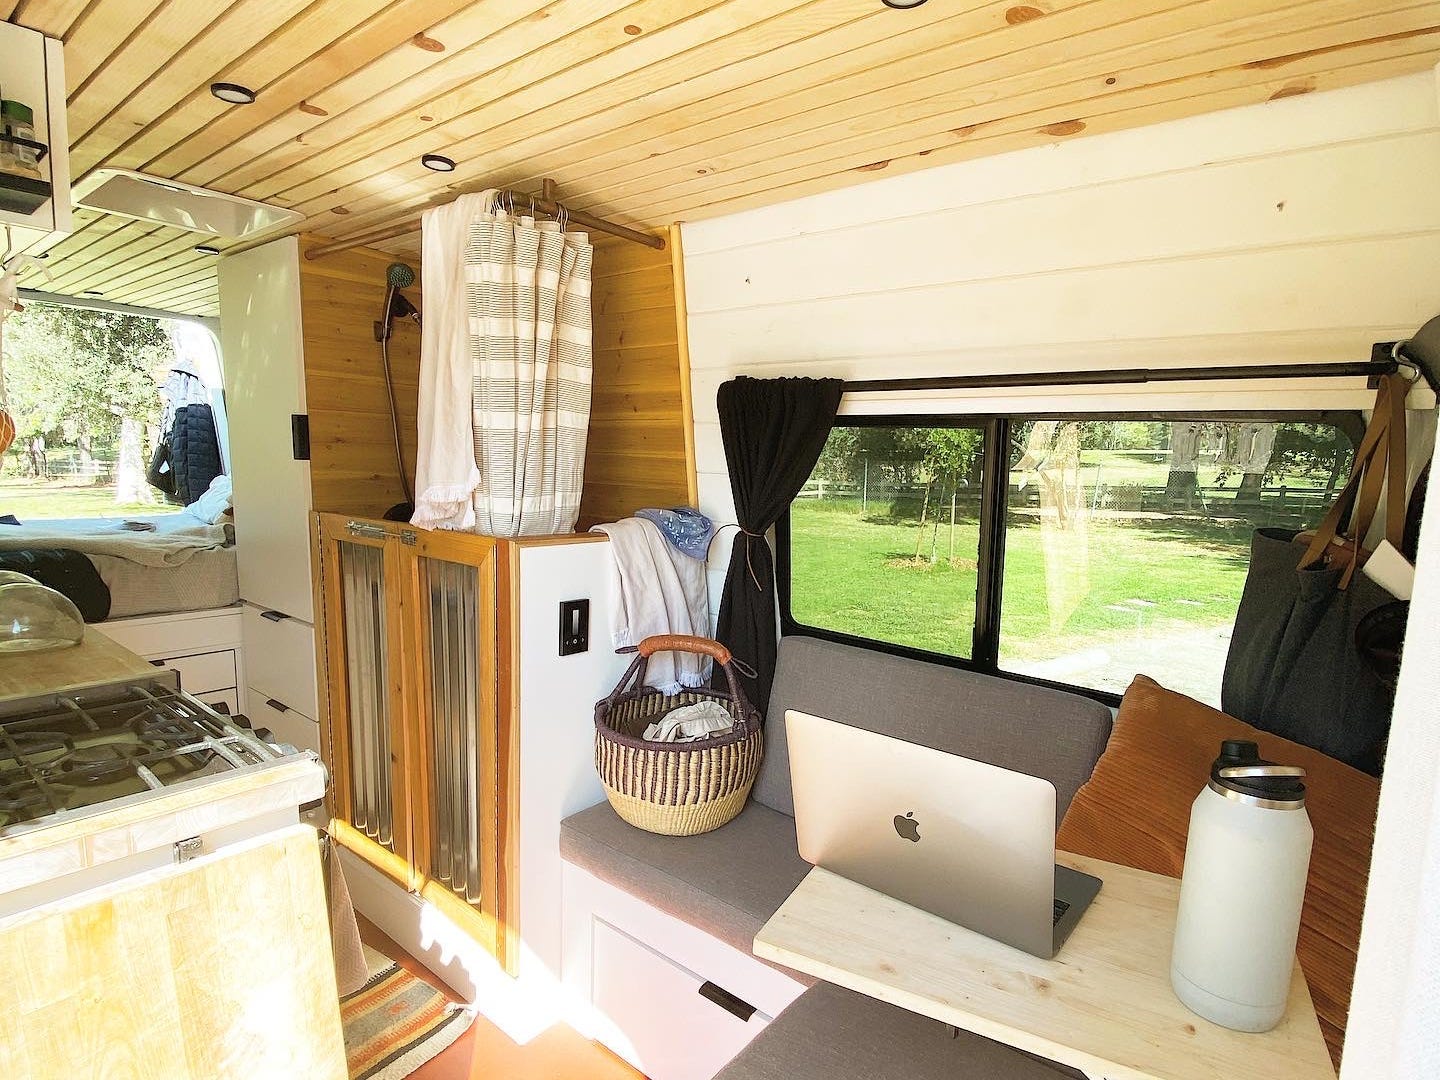 The inside of a van with a small couch, table, bathroom, and kitchen.